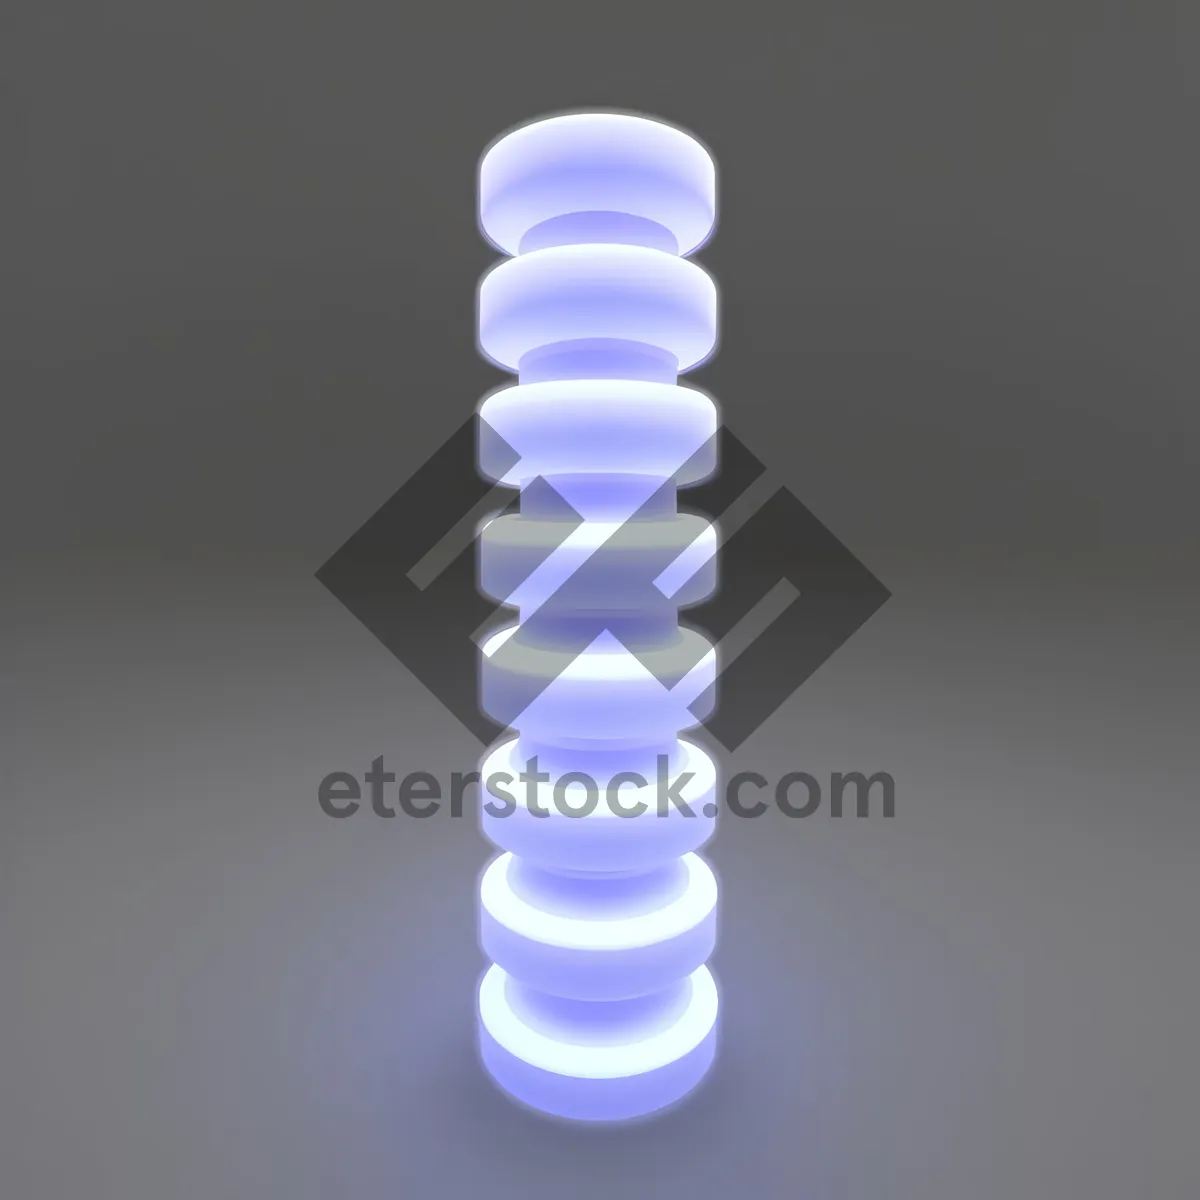 Picture of Prescription Energy Baluster Support Lamp